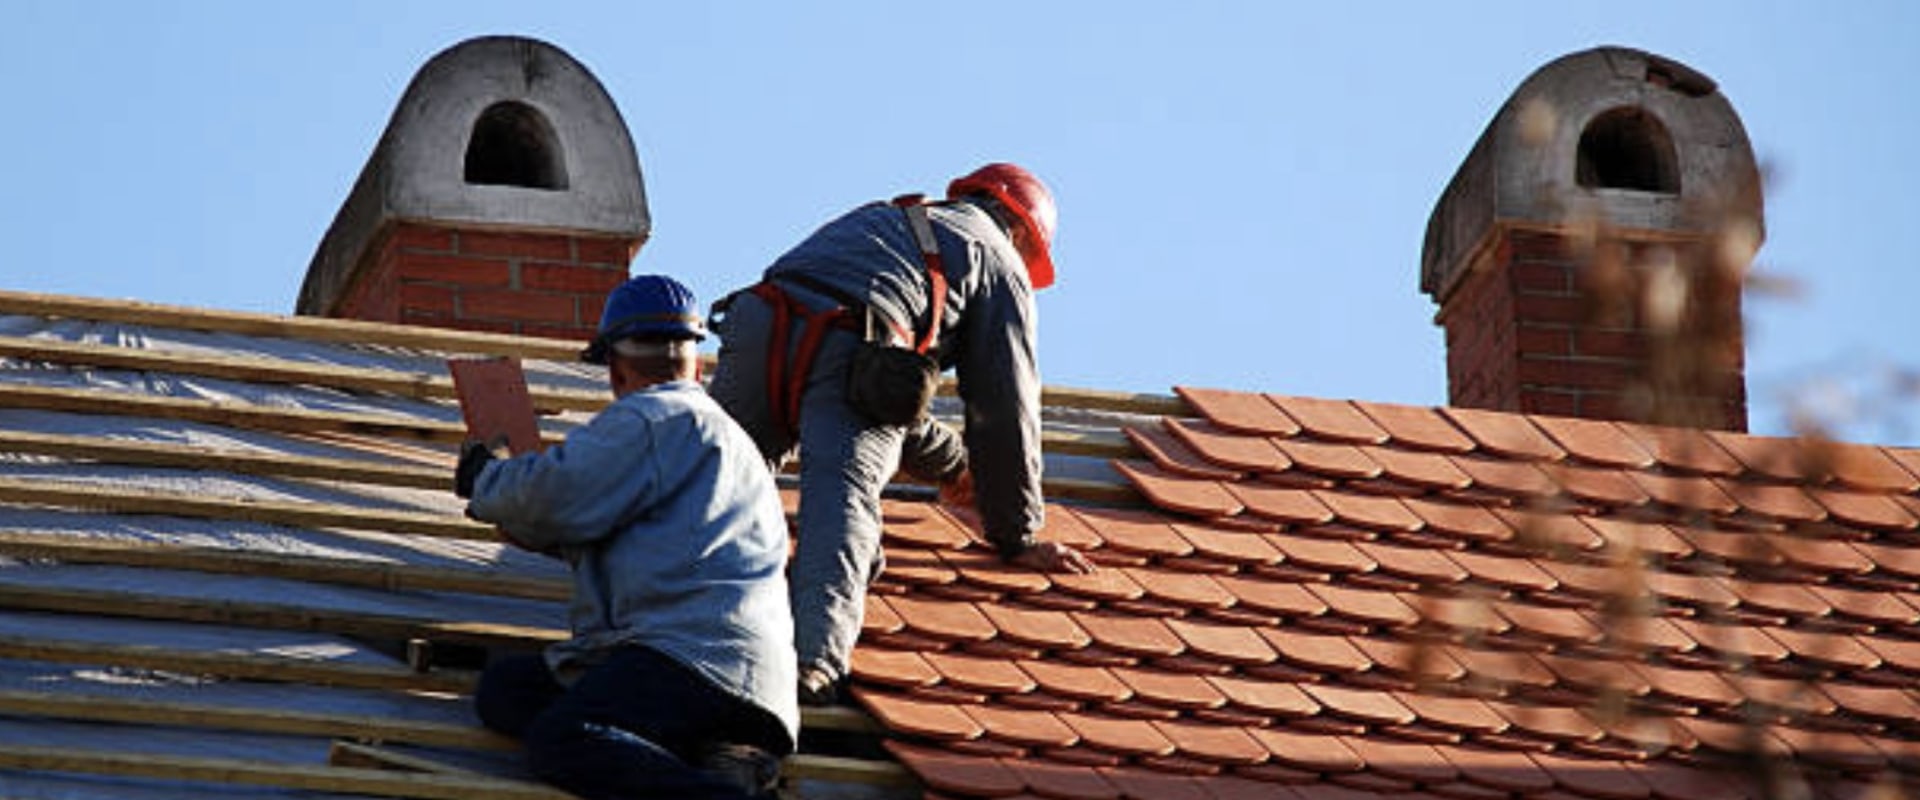 How roofing is done?